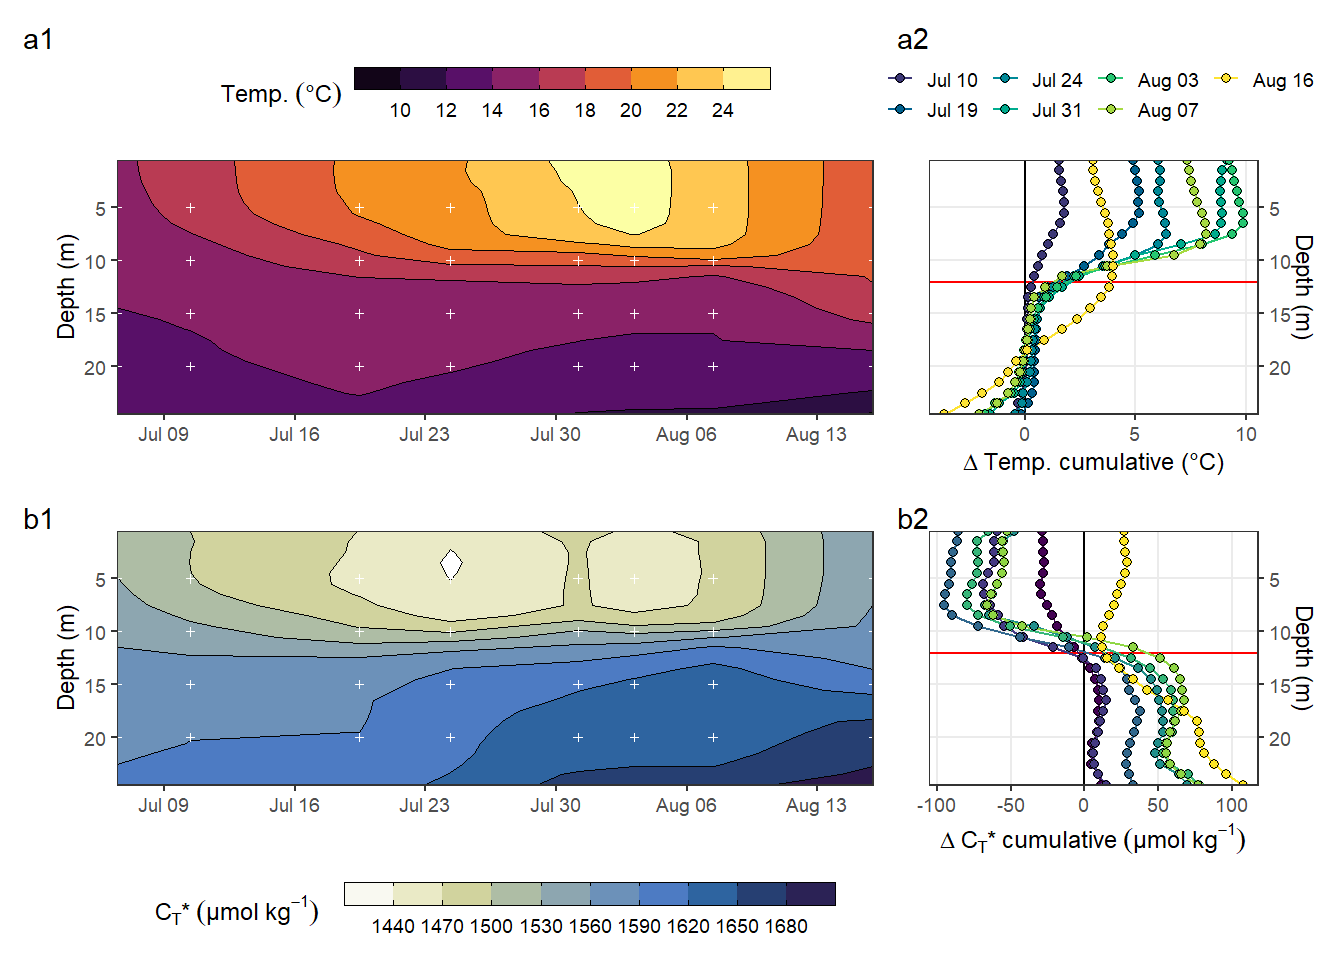 Hovmoeller plots of absolute changes in C~T~ and temperature, combined with profile plots of cumulative changes.